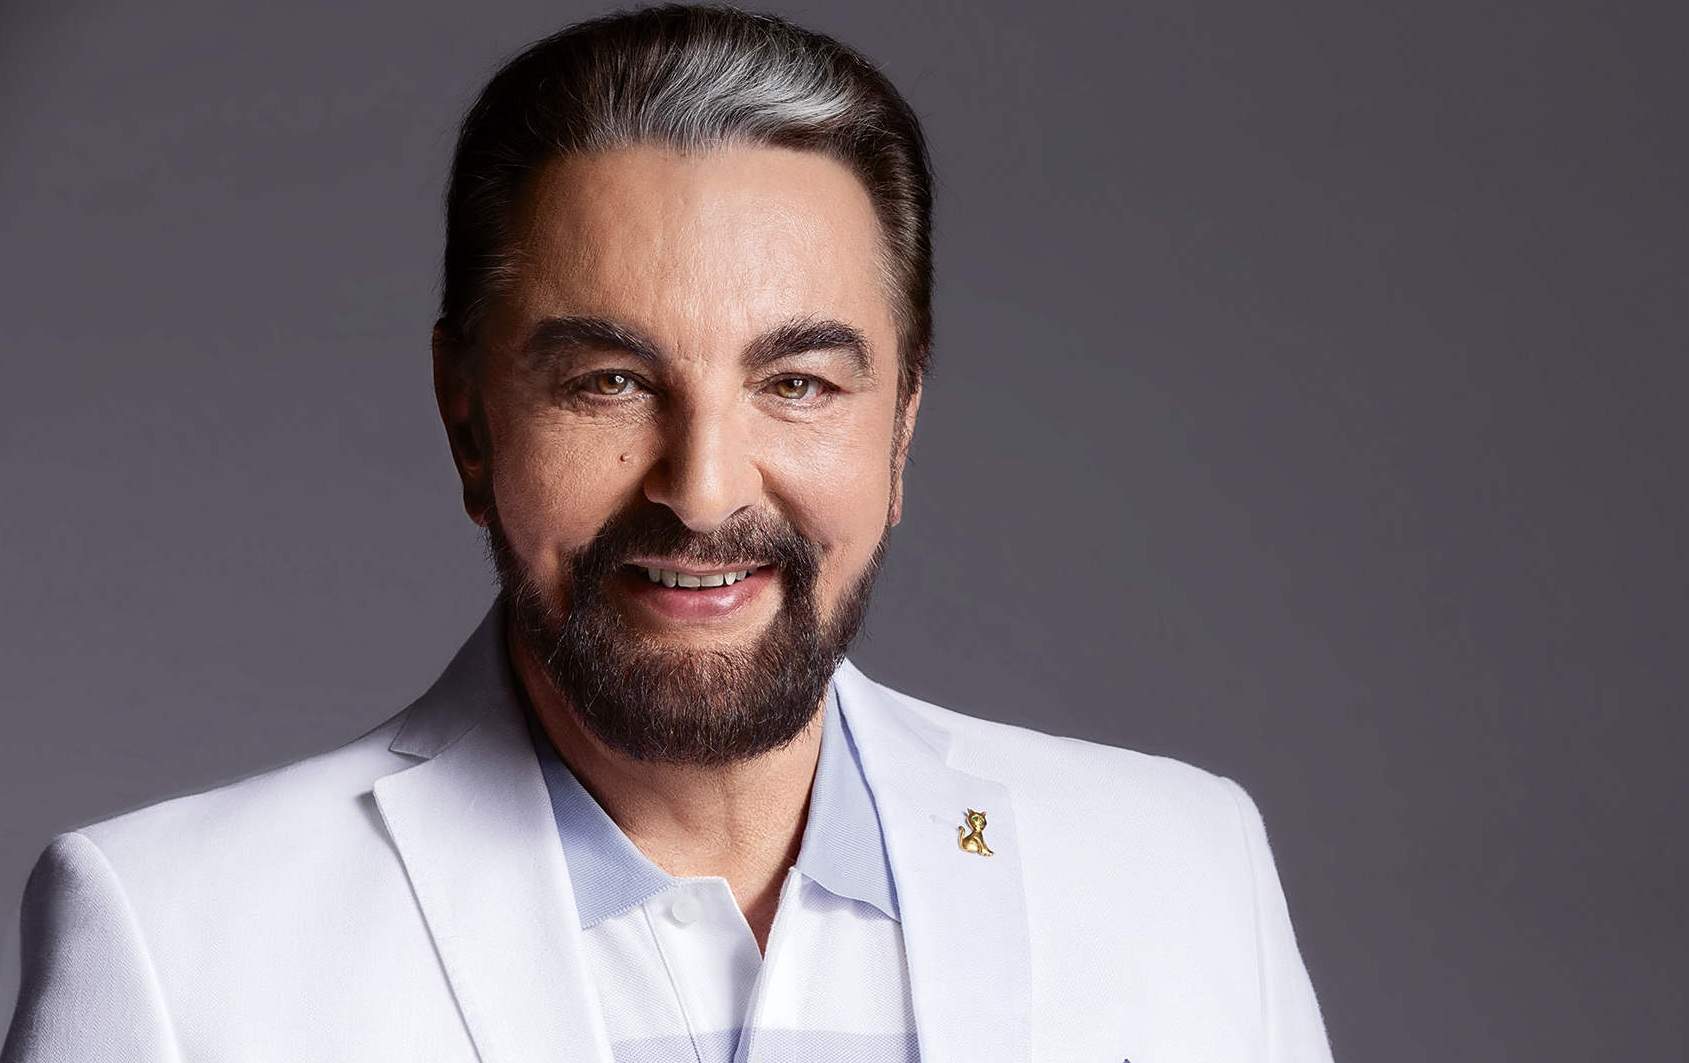 Kabir Bedi Autobiography is scripted with Raw Emotional Honesty